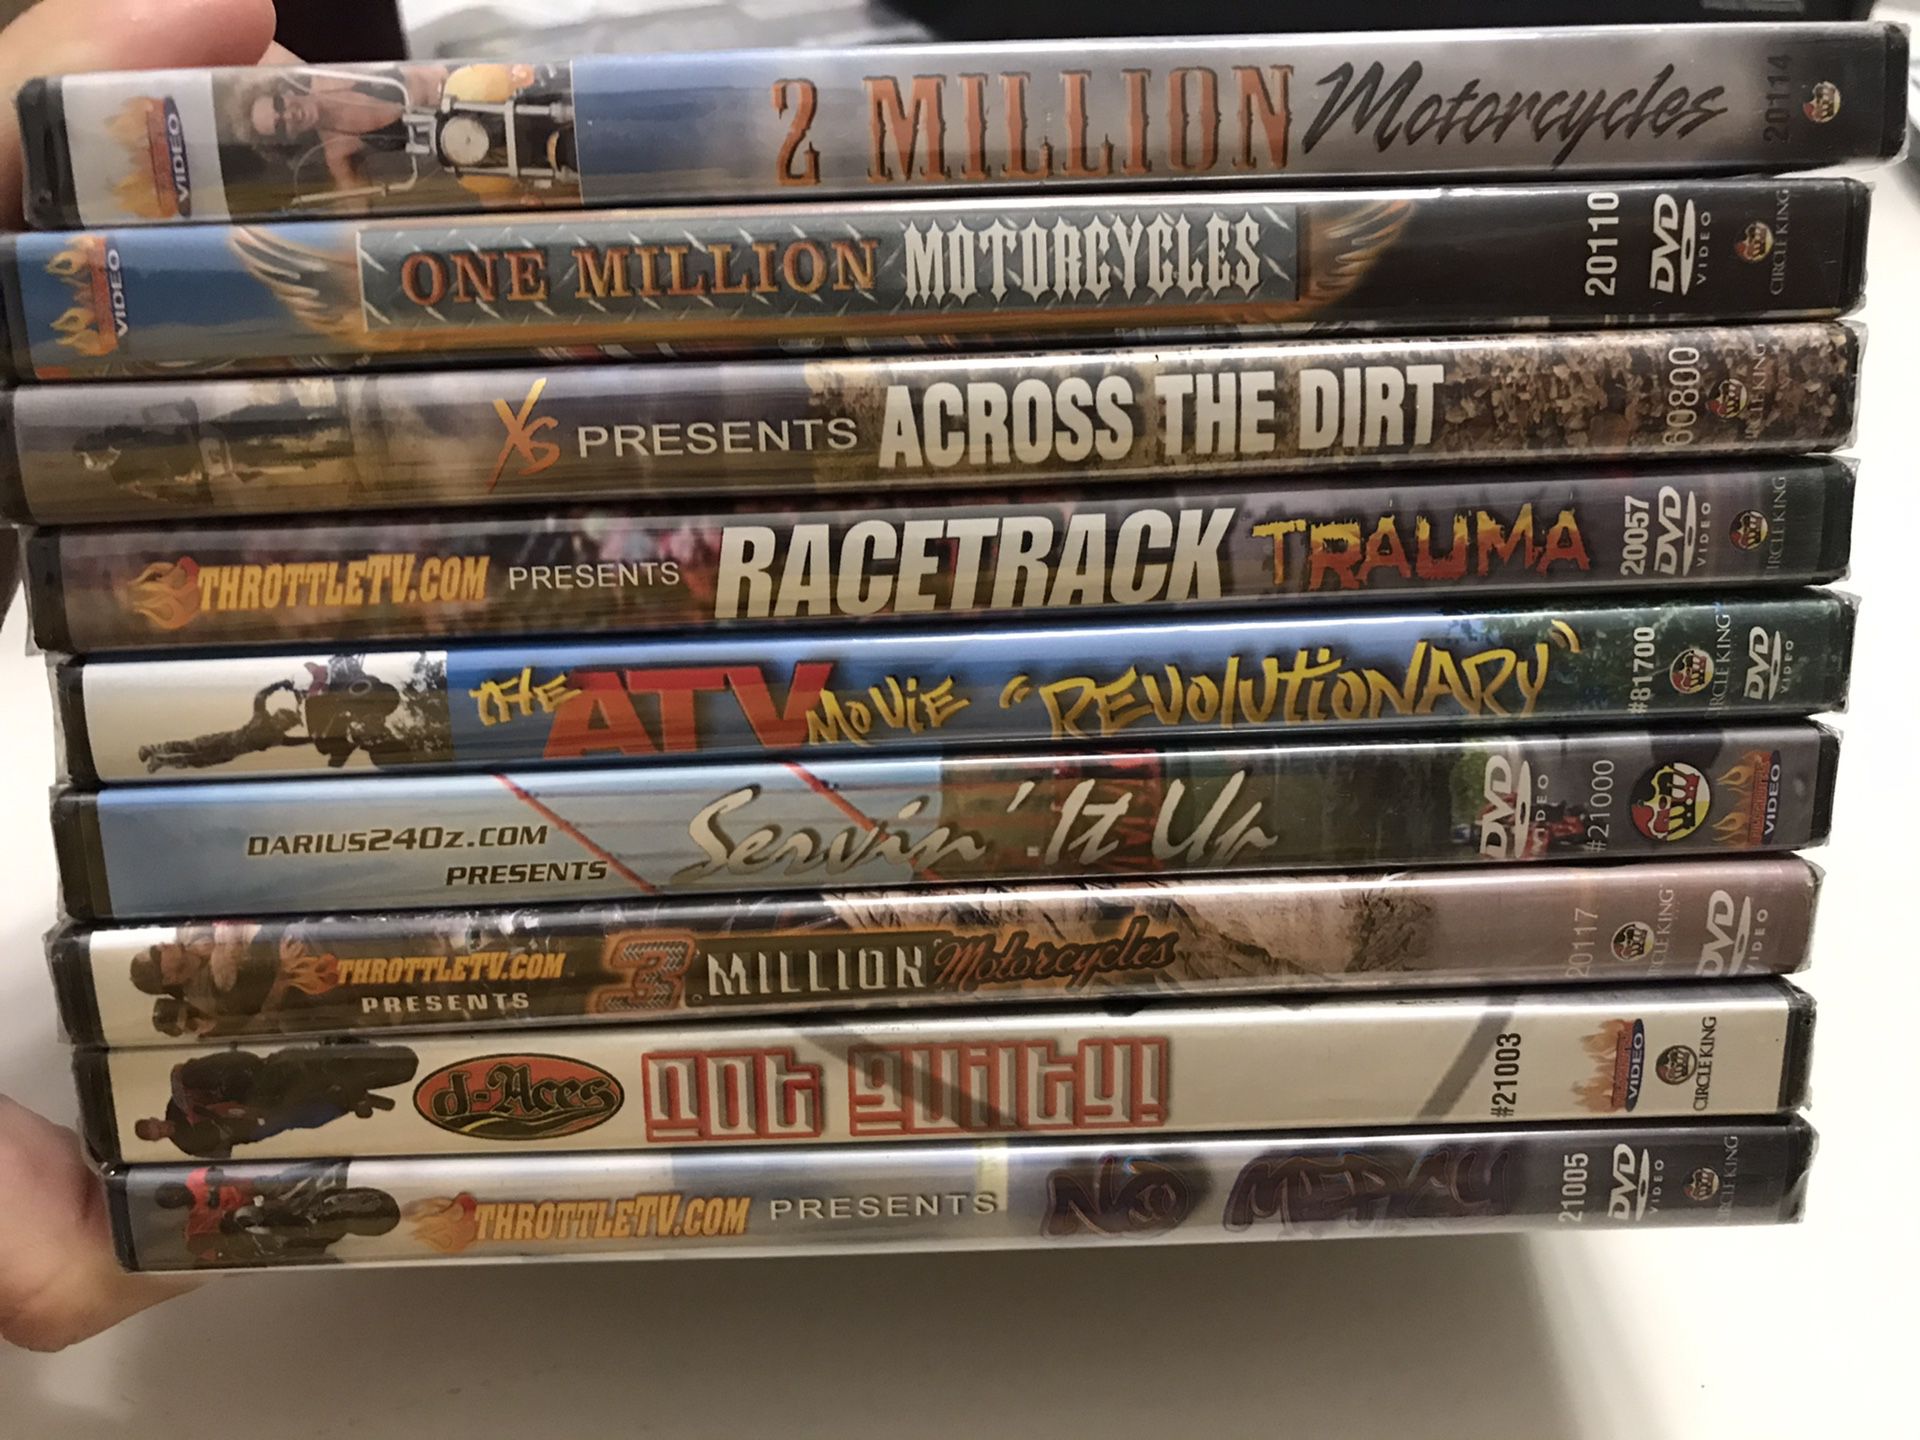 Motorcycle and Car racing DVDs Brand new in wrapping!